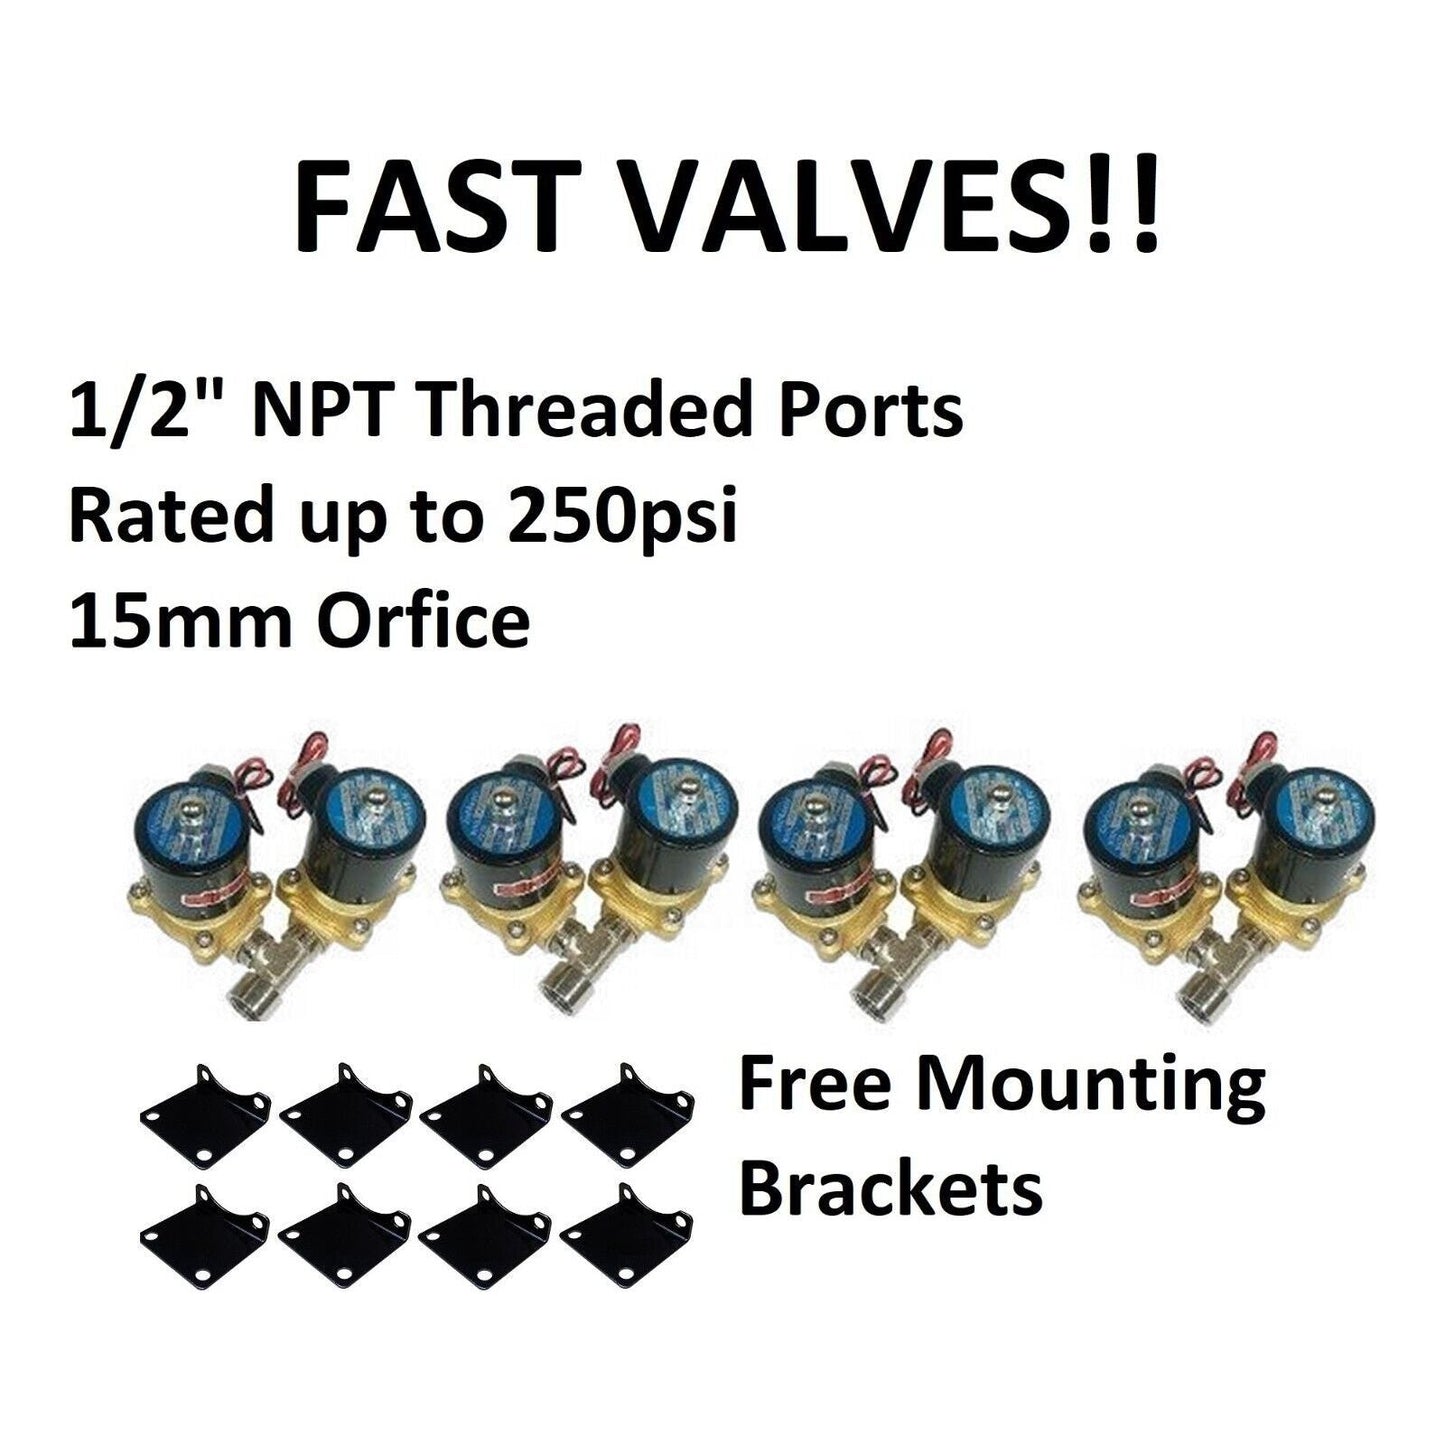 fast valves and mounting brackets